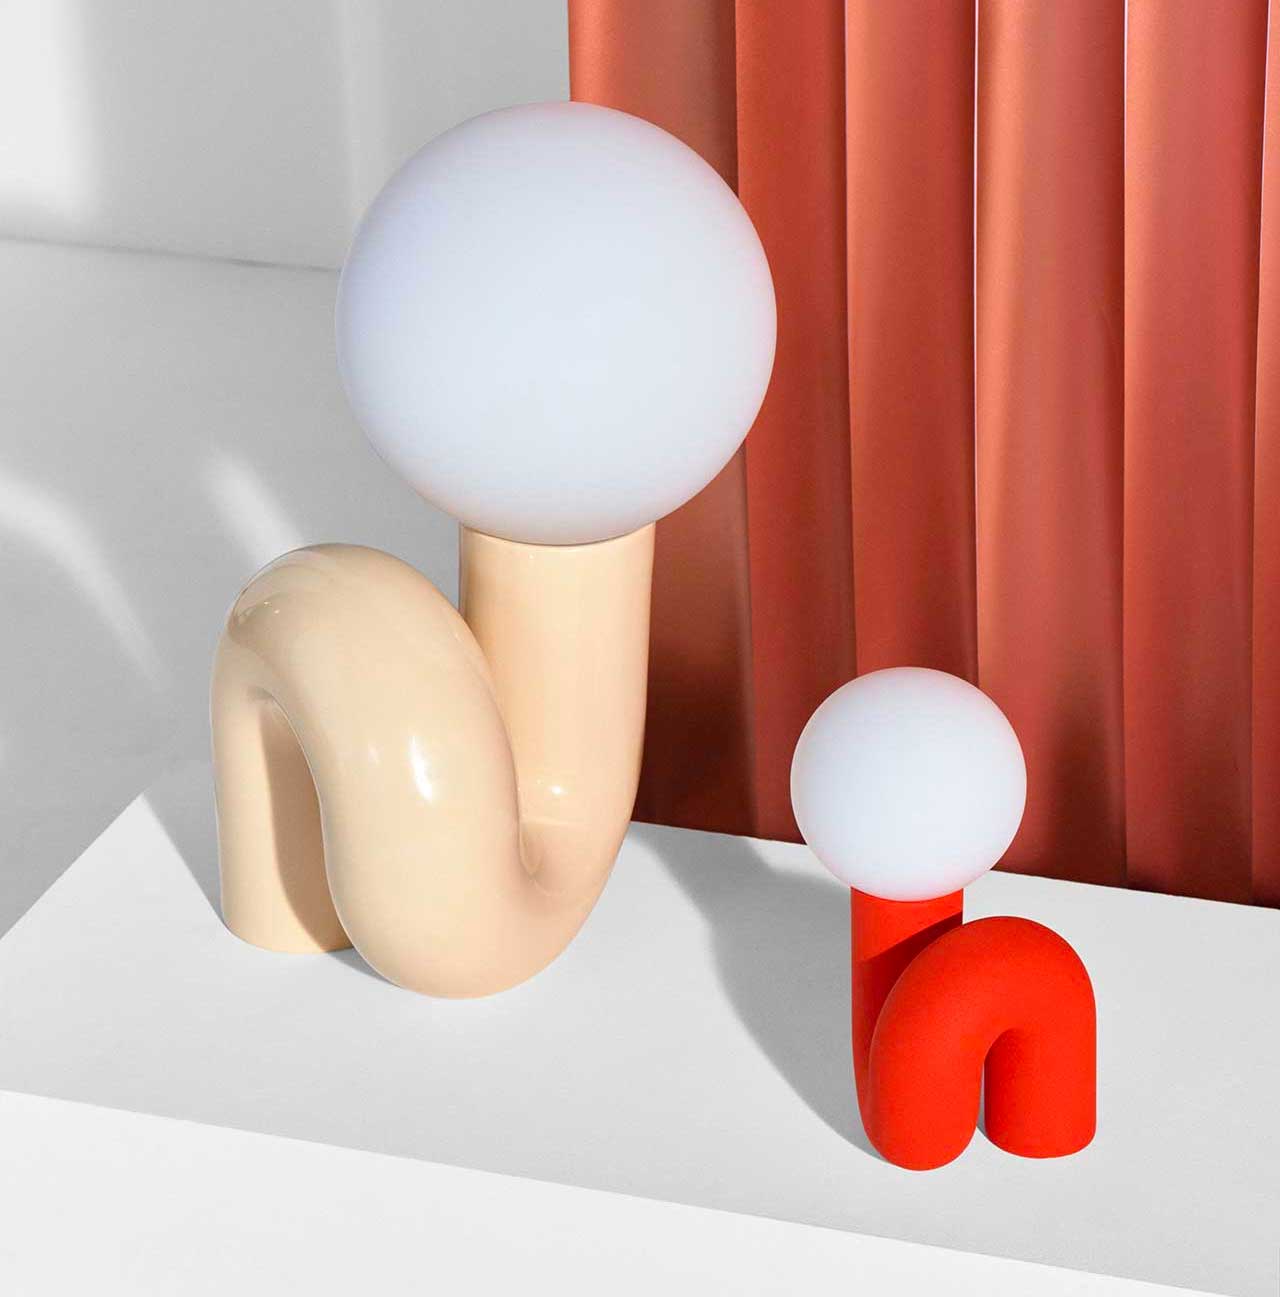 The Ceramic Neotenic Lamp Doubles as a Fixture and Sculpture